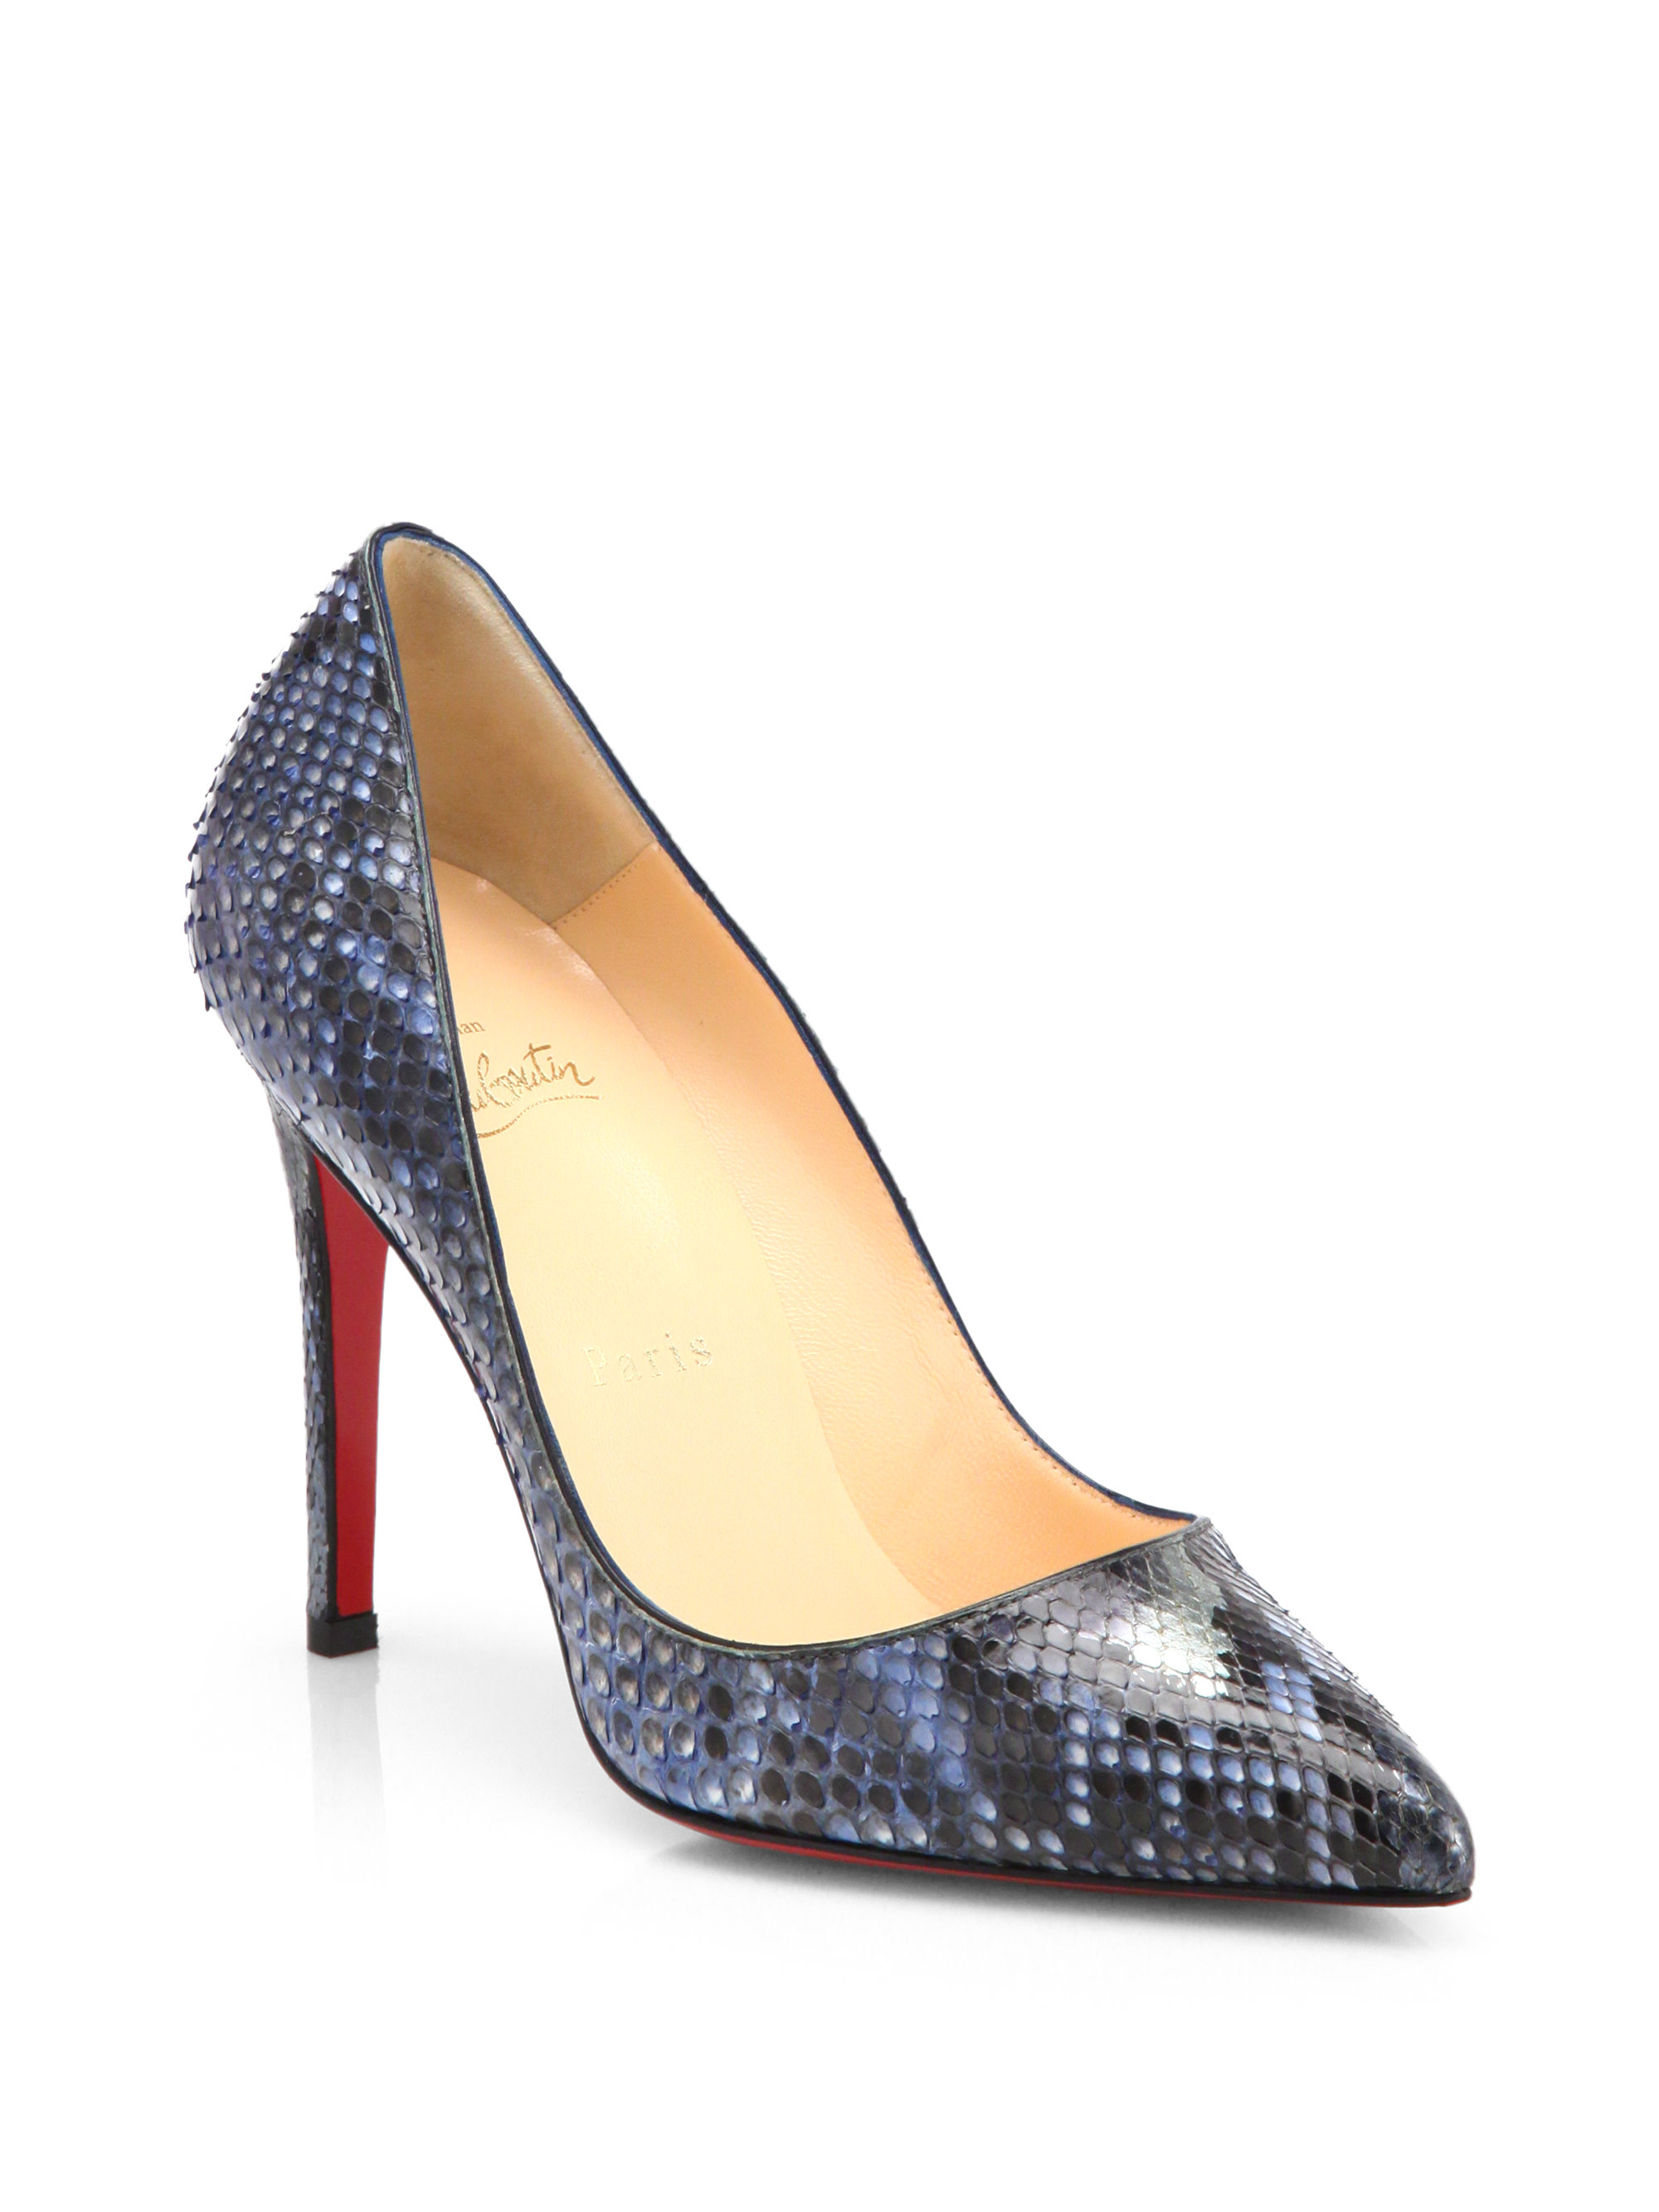 Christian Louboutin Pigalle 100 Python Pumps in (NAVY) | Lyst